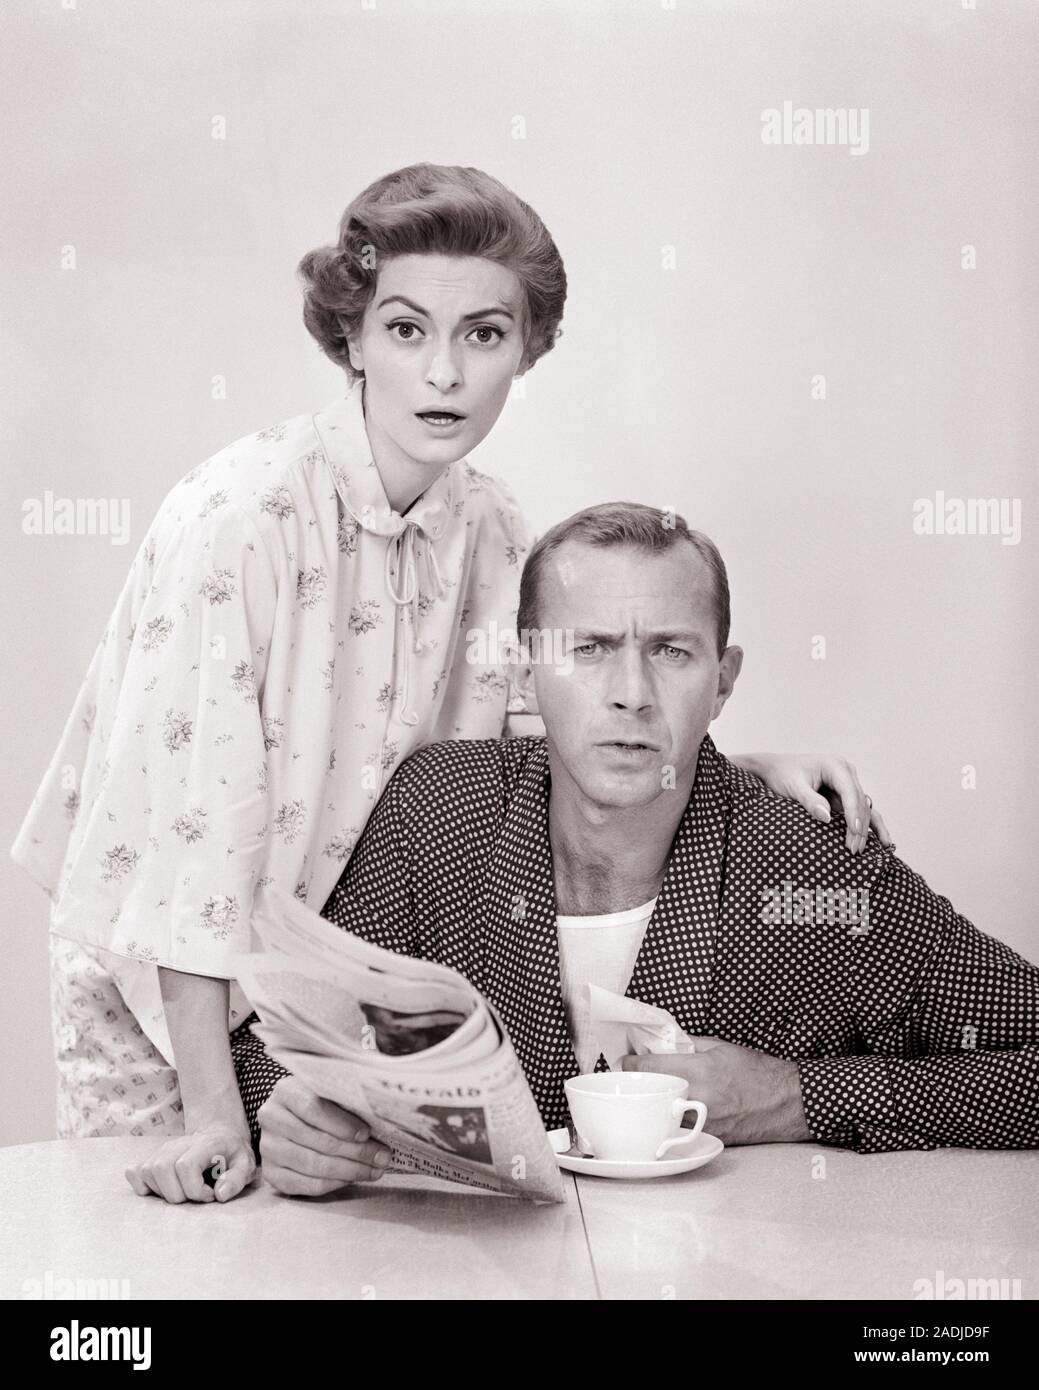 1950s PORTRAIT OF COUPLE IN BATHROBES LOOKING AT CAMERA WITH QUESTIONING EXPRESSION  - s5905 CRR001 HARS ALARM NOSTALGIC PAIR NEWS SUBURBAN URBAN AGE OLD TIME SURPRISE NOSTALGIA OLD FASHION COMMUNICATION SHOCK YOUNG ADULT INFORMATION WORRY FEMALES MARRIED STUDIO SHOT ROBE SPOUSE HUSBANDS HOME LIFE COPY SPACE FRIENDSHIP HALF-LENGTH LADIES FROWN PERSONS MALES PAJAMAS AMERICANA TROUBLED B&W CONCERNED FROWNING MORNING PARTNER EYE CONTACT BRUNETTE DOT BEVERAGE MATE AND QUESTION TABLETOP MAN AND WOMAN PEOPLE MEN OF NIGHTGOWN CONNECTION CONCEPTUAL BRUNCH MANLY STYLISH MIDDLE AGE MID-ADULT Stock Photo